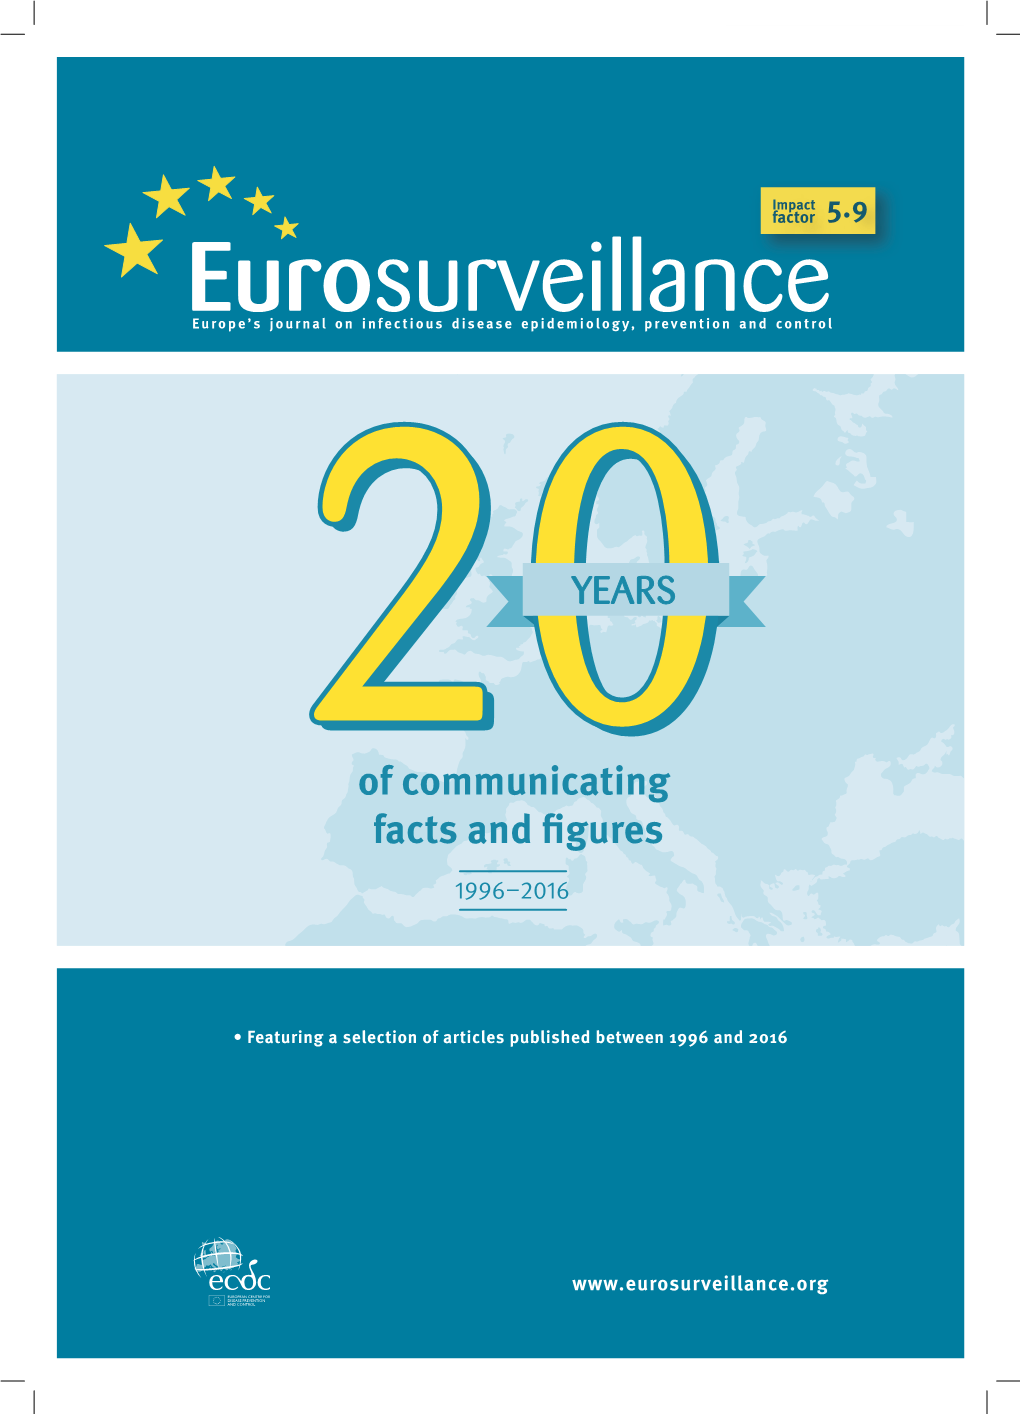 20 Years of Communicating Facts and Figures 2 2008 Increasing Prevalence of ESBL-Producing Steffens I Enterobacteriaceae in Europe 48 Coque T Et Al